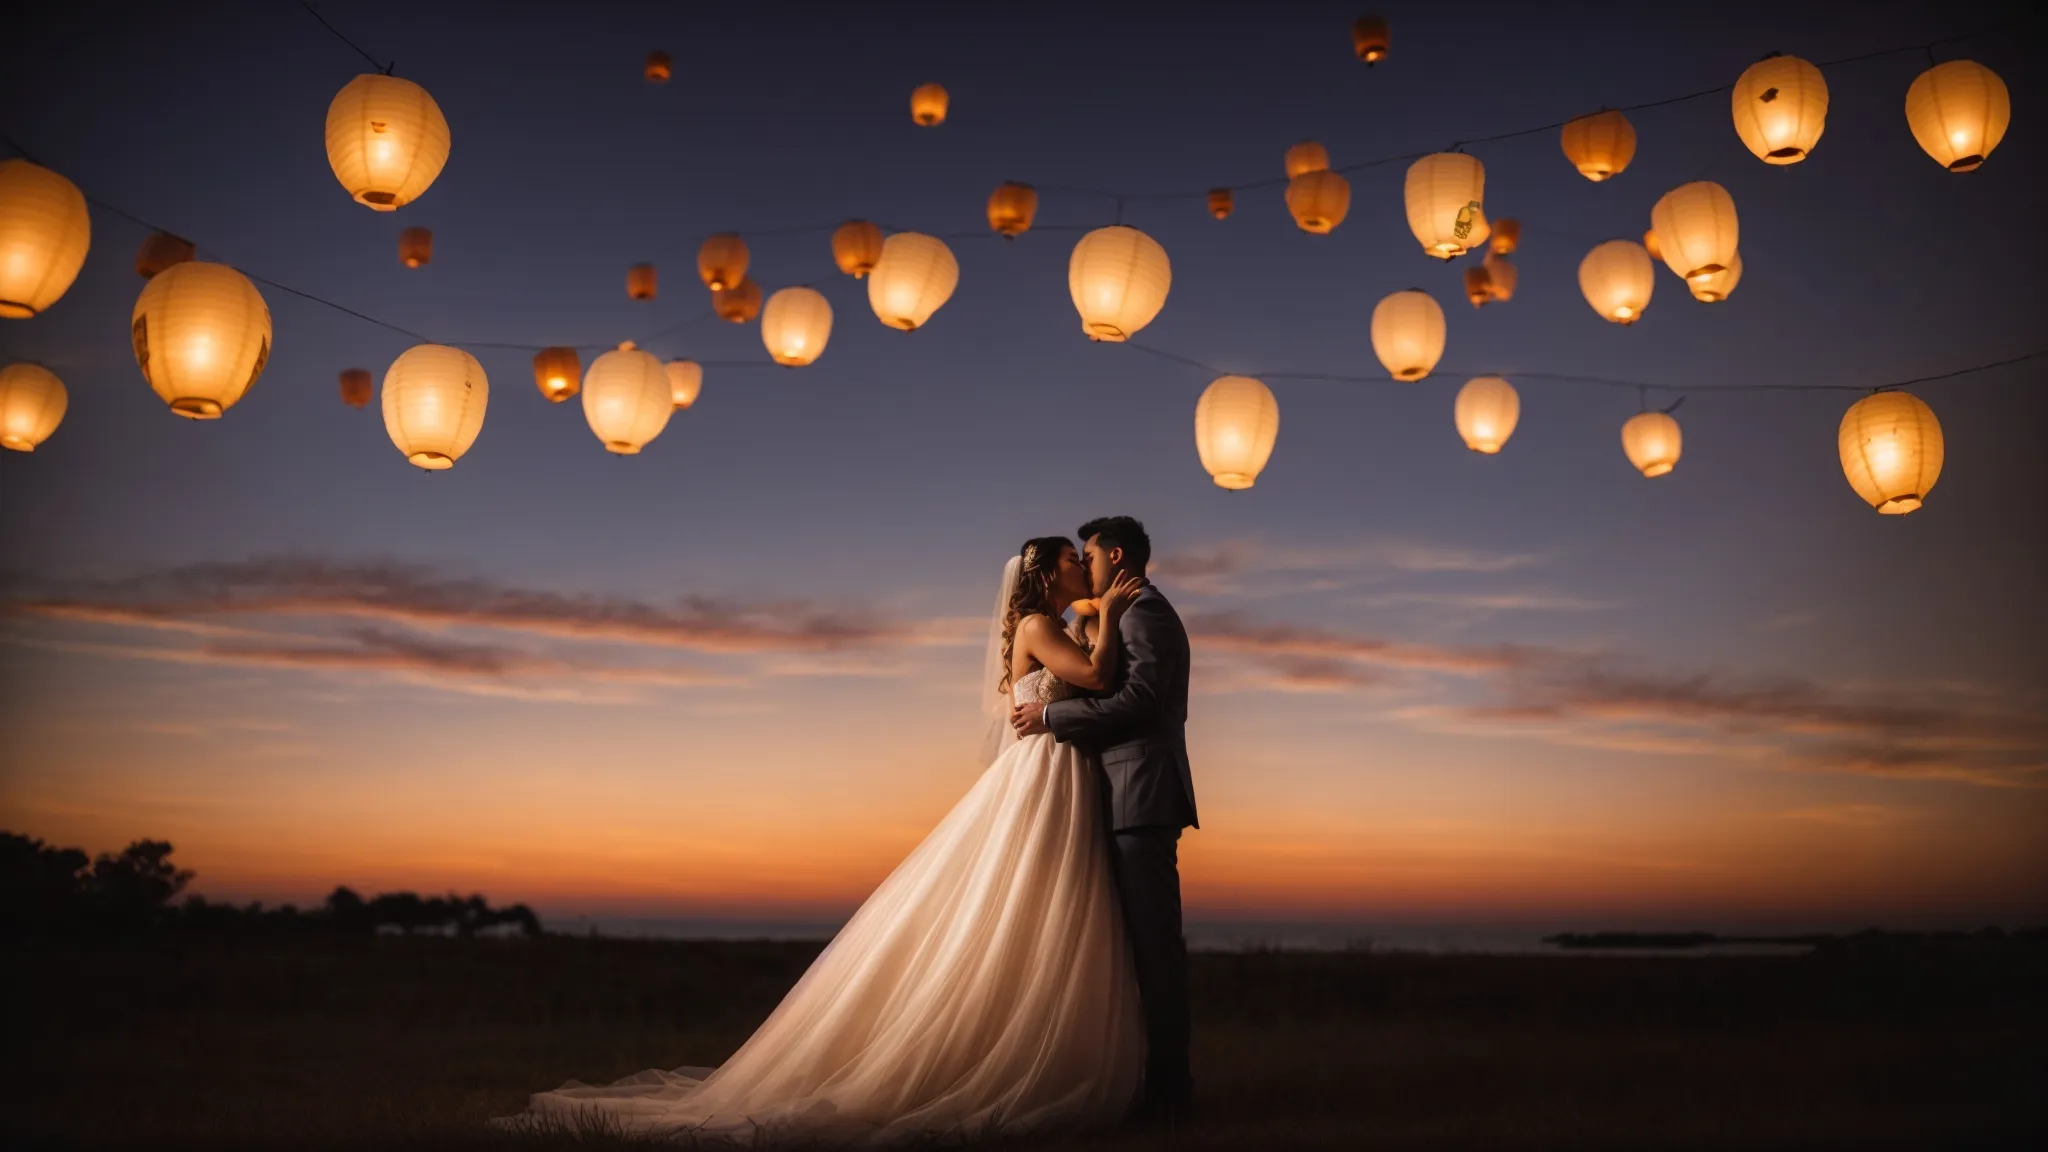 a bride and groom share a romantic kiss under a sunset sky, framed by softly glowing lanterns.